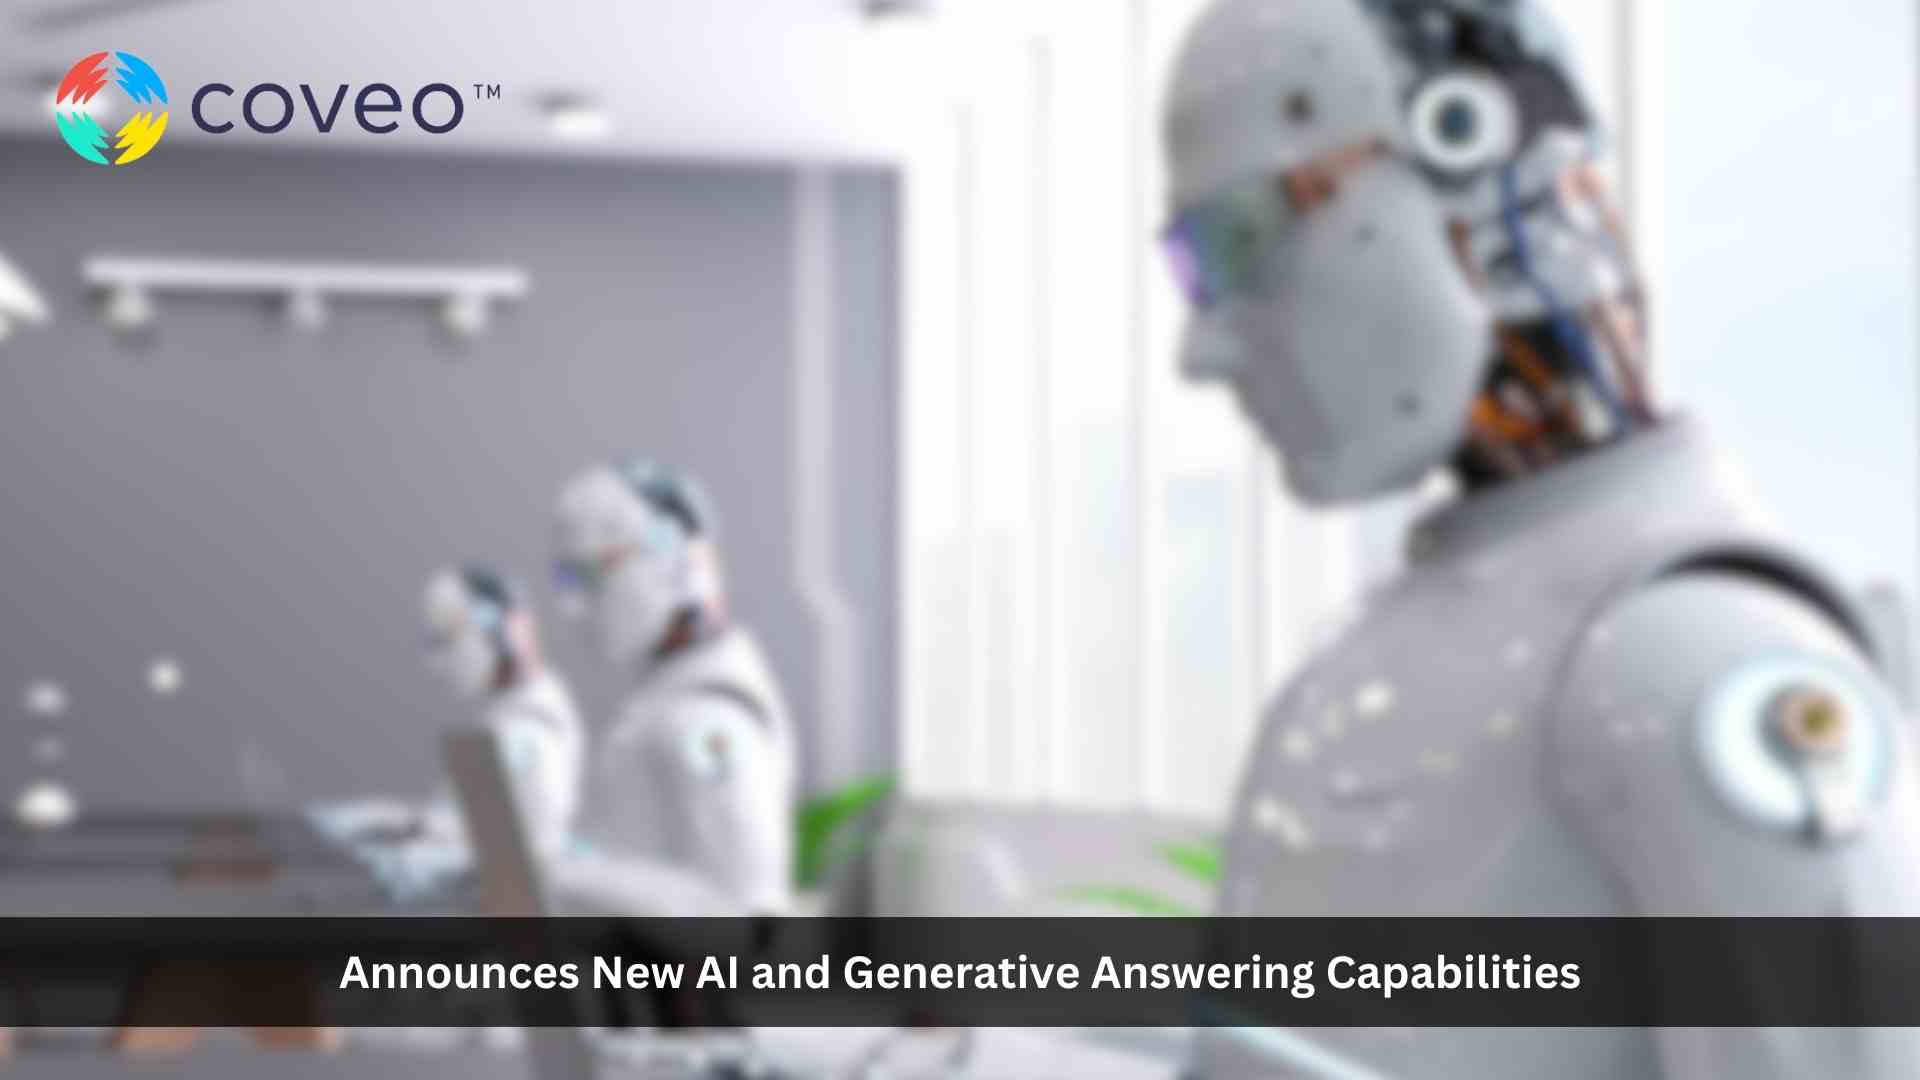 Coveo announces new AI and Generative Answering capabilities to power individualized, trusted, and connected experiences within each CX and EX interaction